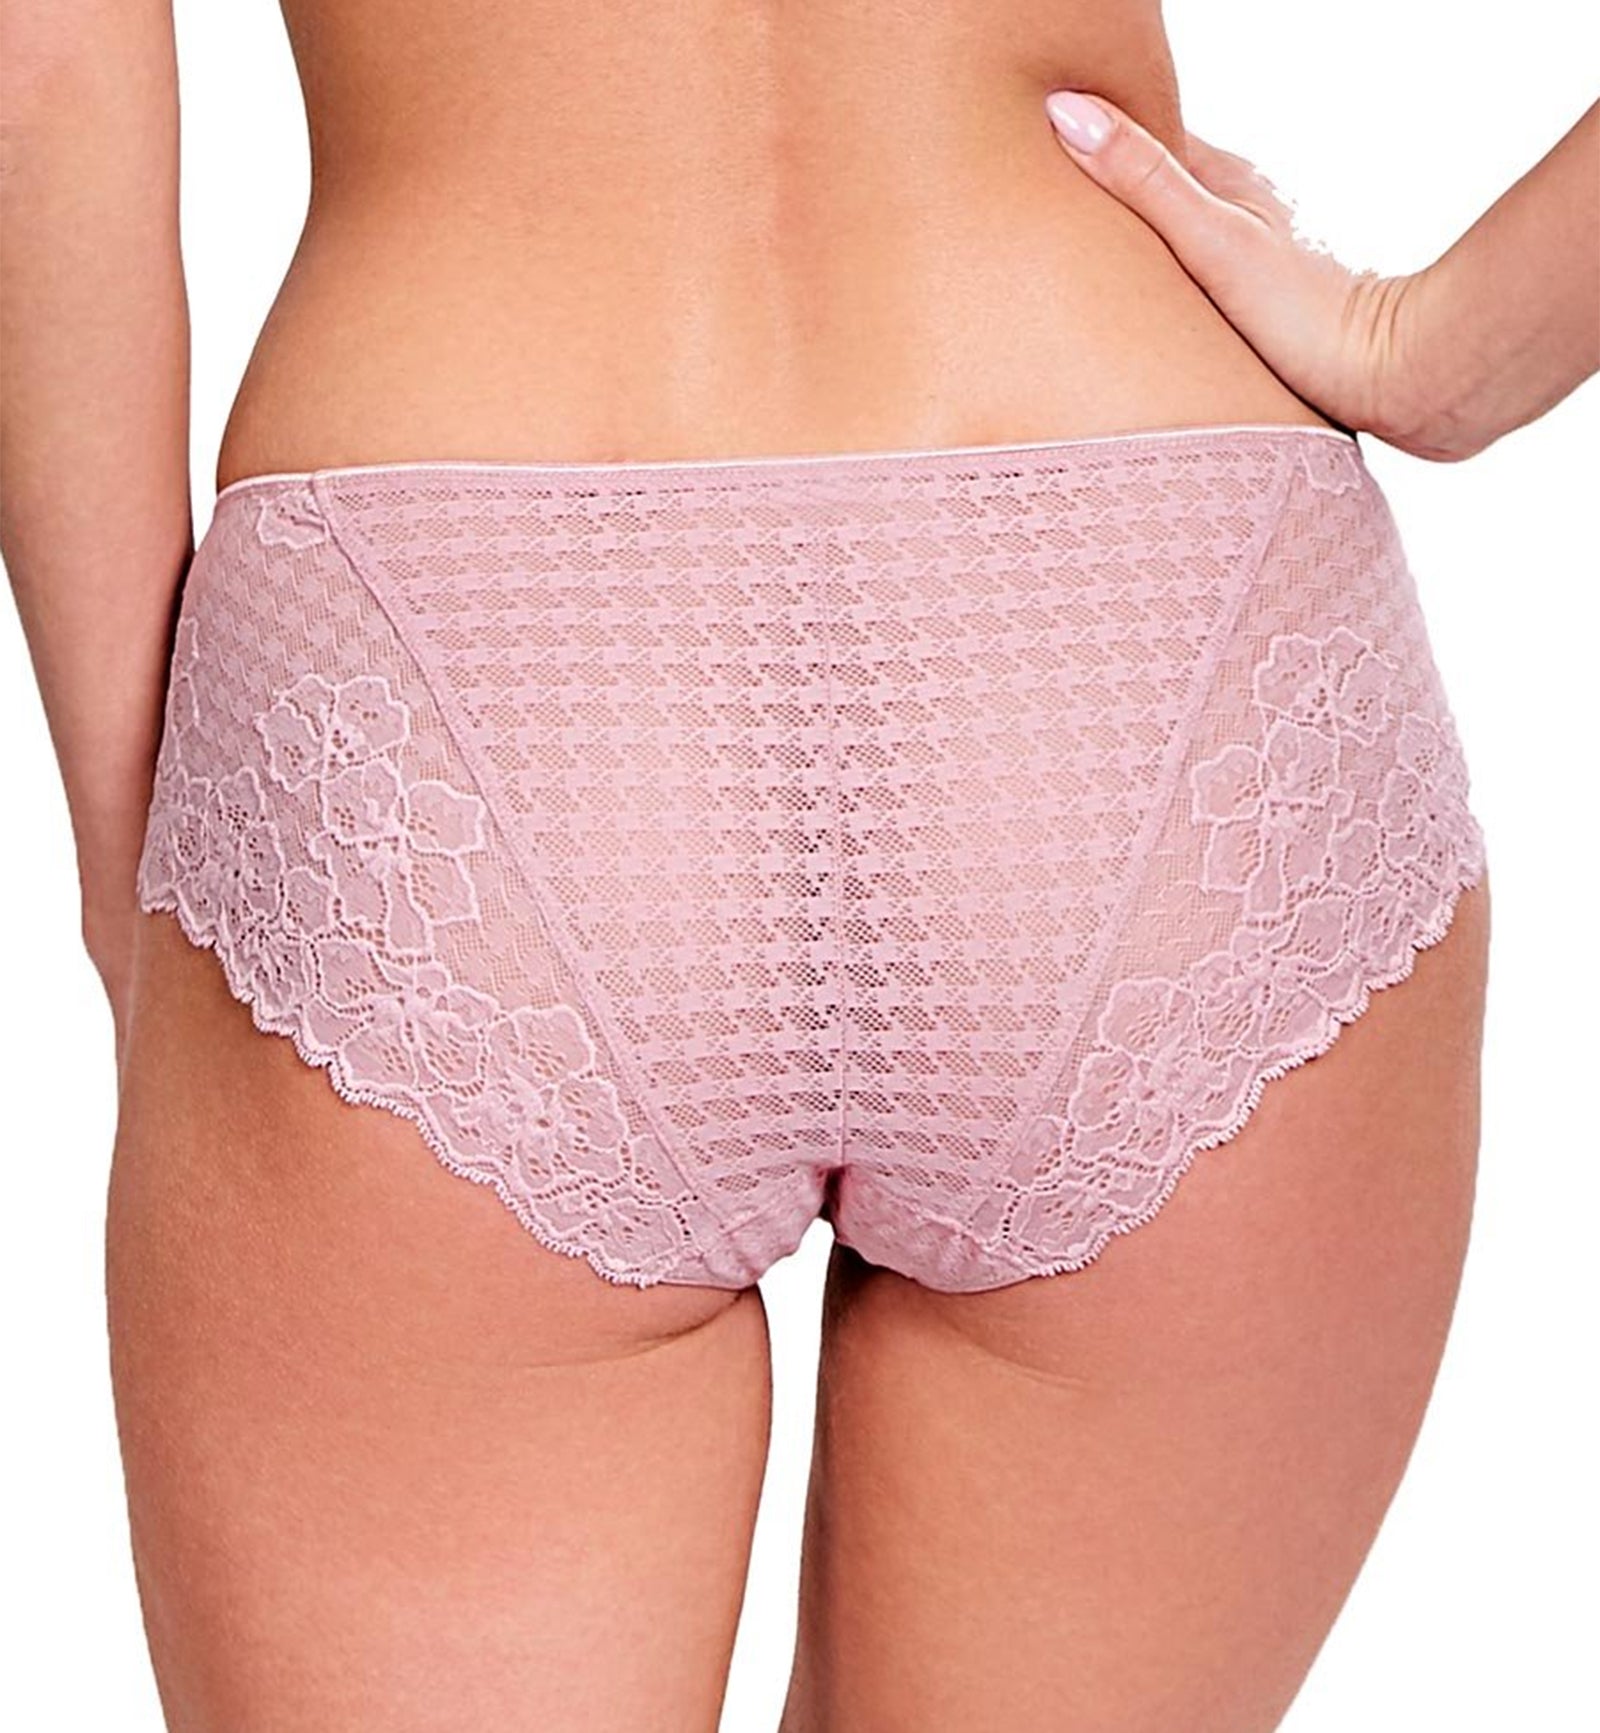 Panache Envy Matching Brief (7282),XS,Rose Pink - Rose Pink,X-Small